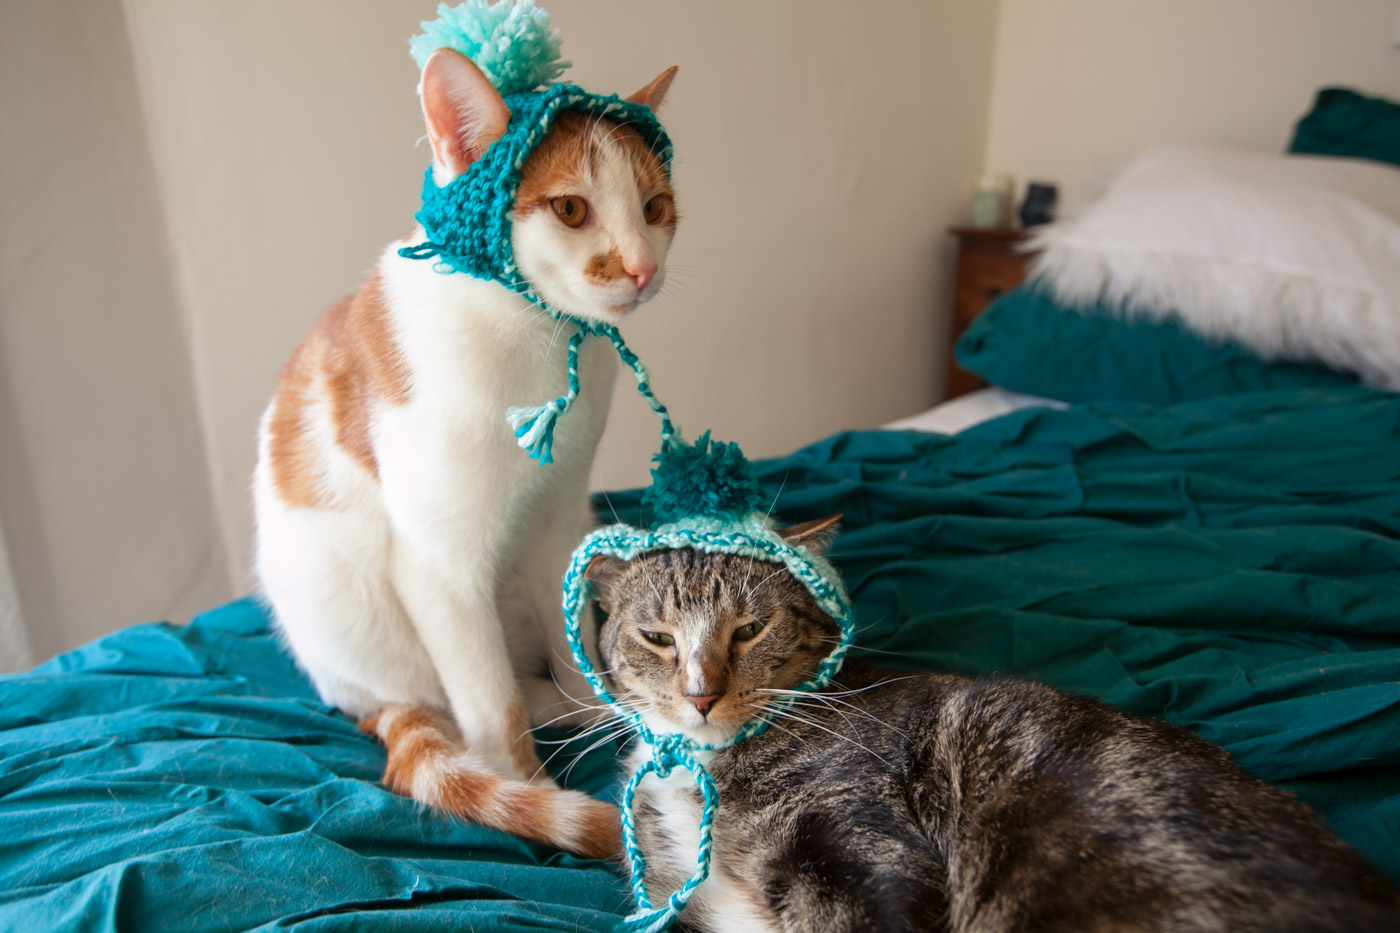 Knitting hats for my cats using the book Cats in Hats: 30 Knit and Crochet Hat Patterns for Your Kitty by Sara Thomas